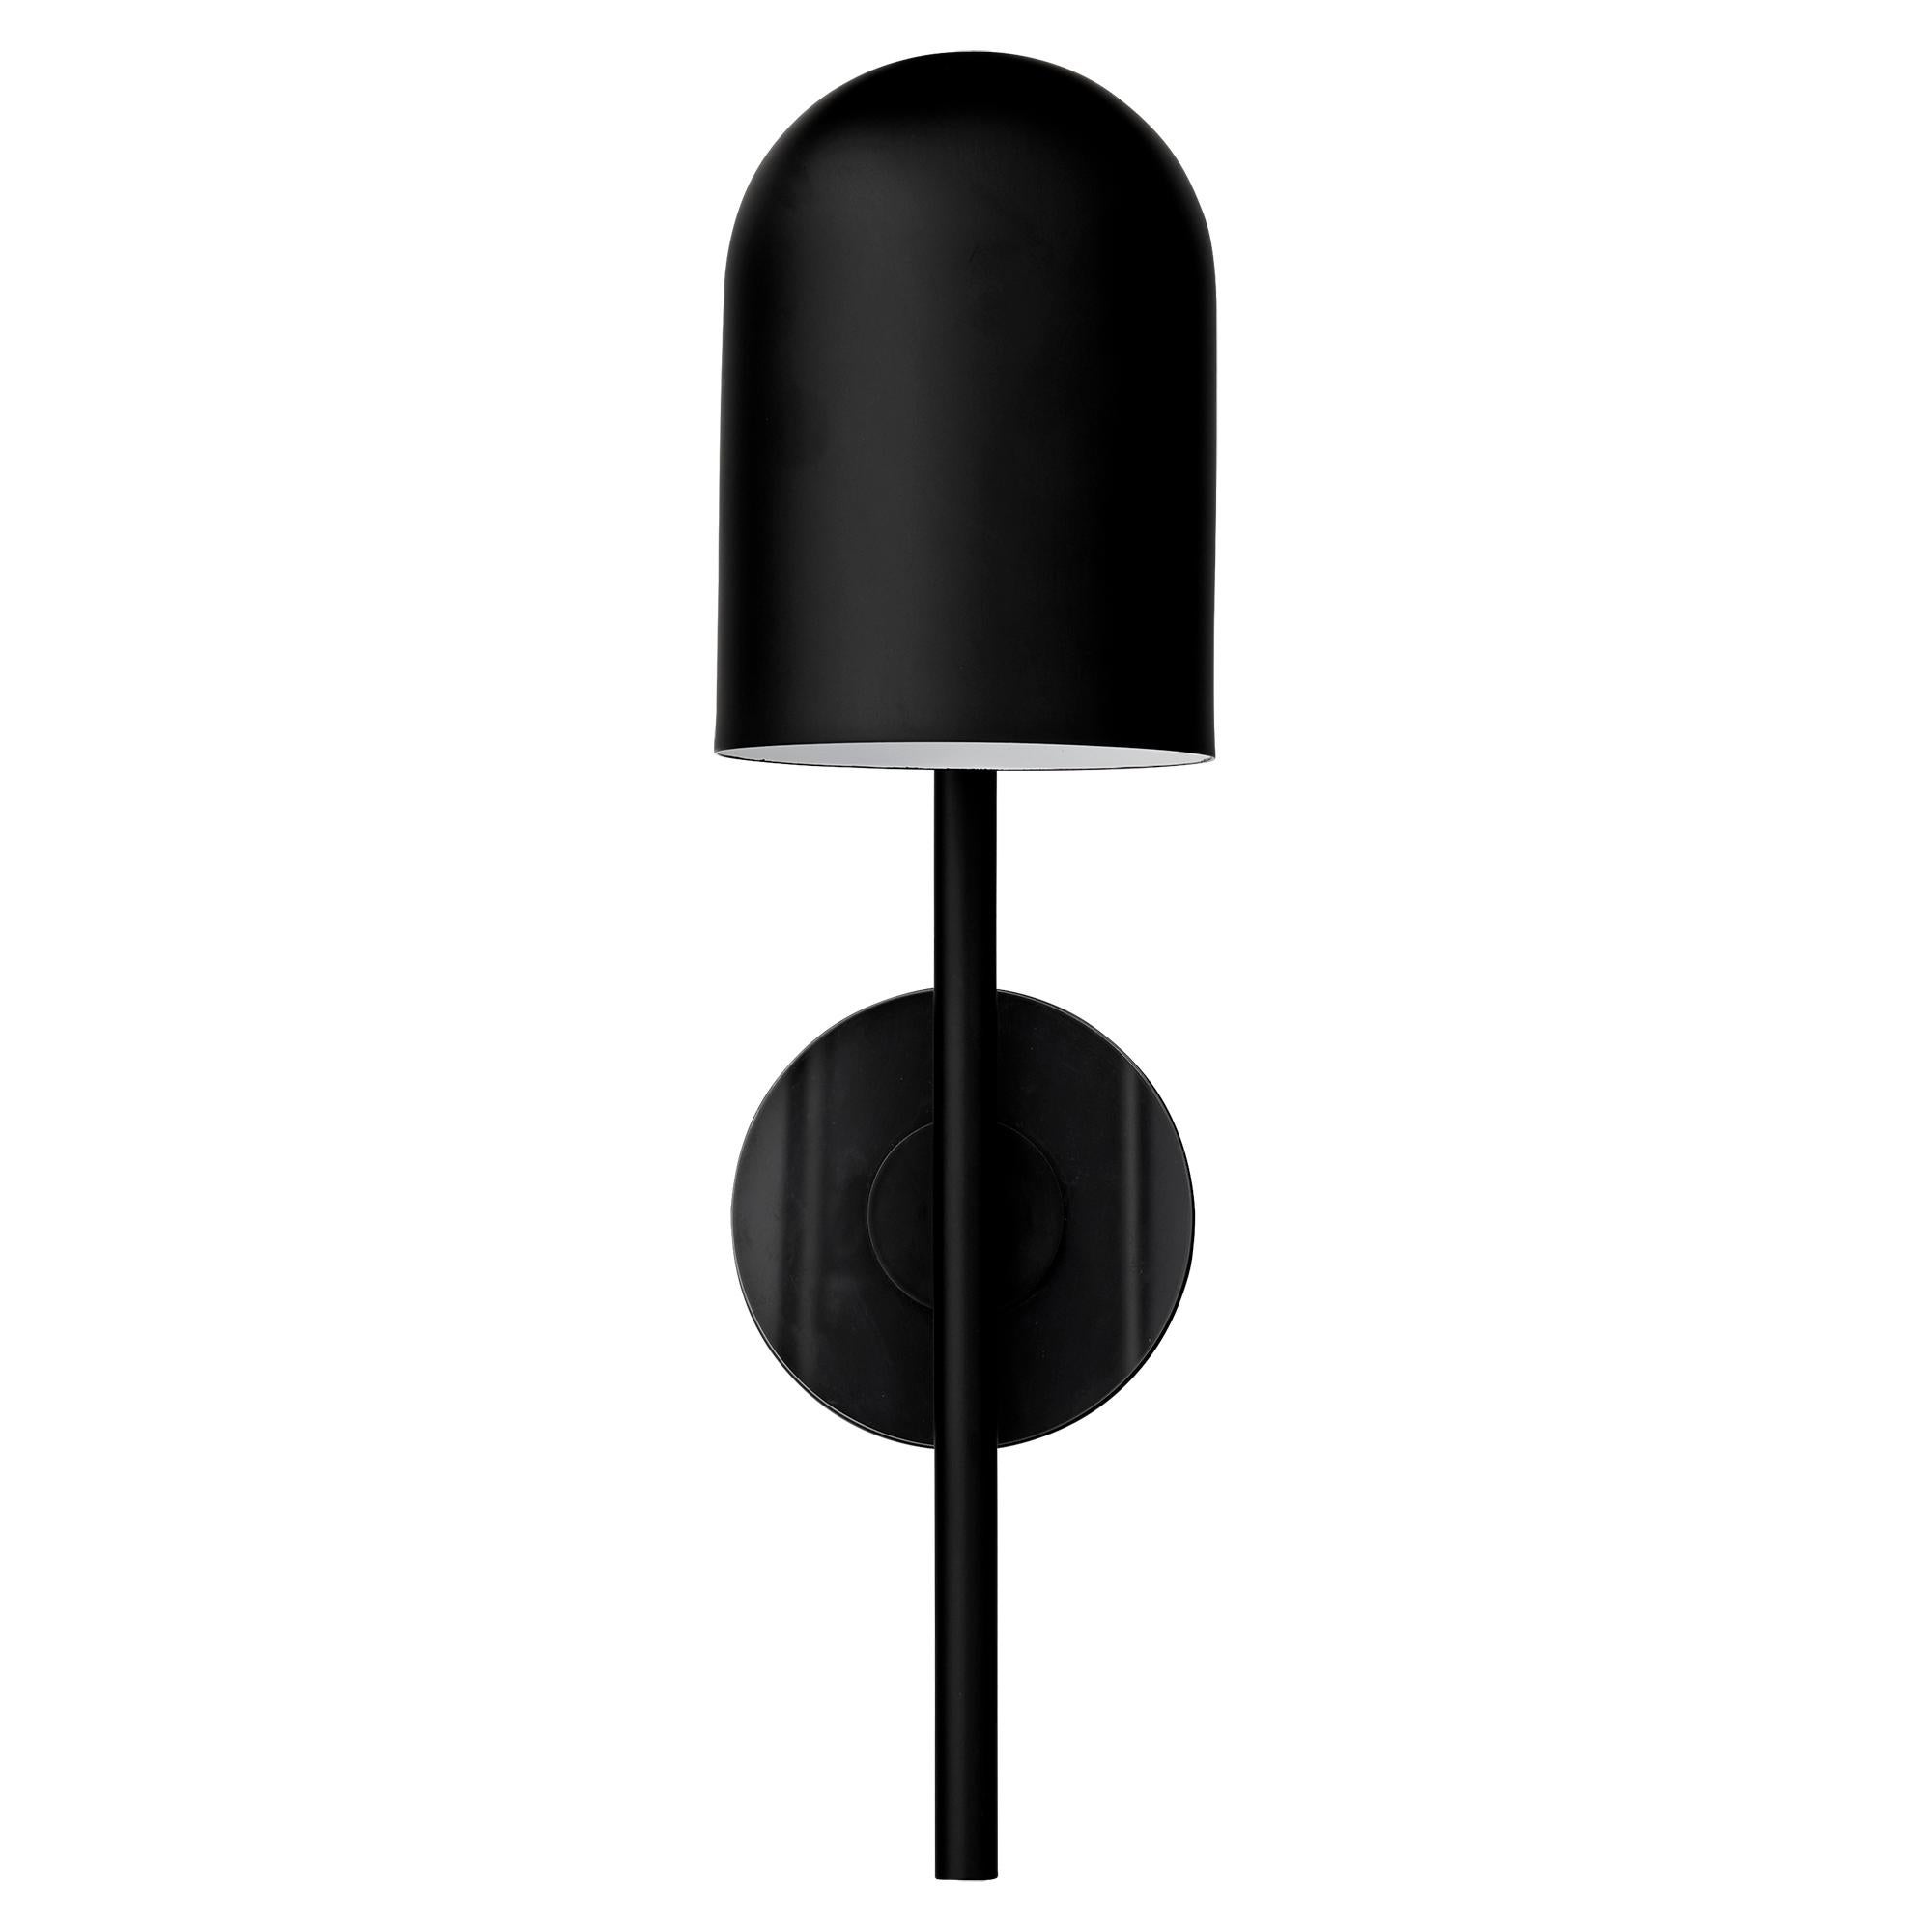 Black cylinder wall lamp
Dimensions: Diameter 12 x height 45 cm
Materials: Glass, iron w. Brass plating & powder coating.
Details: For all lamps, the recommended light source is E27 max 25W&220/240 voltage. We recommend LED in order to avoid